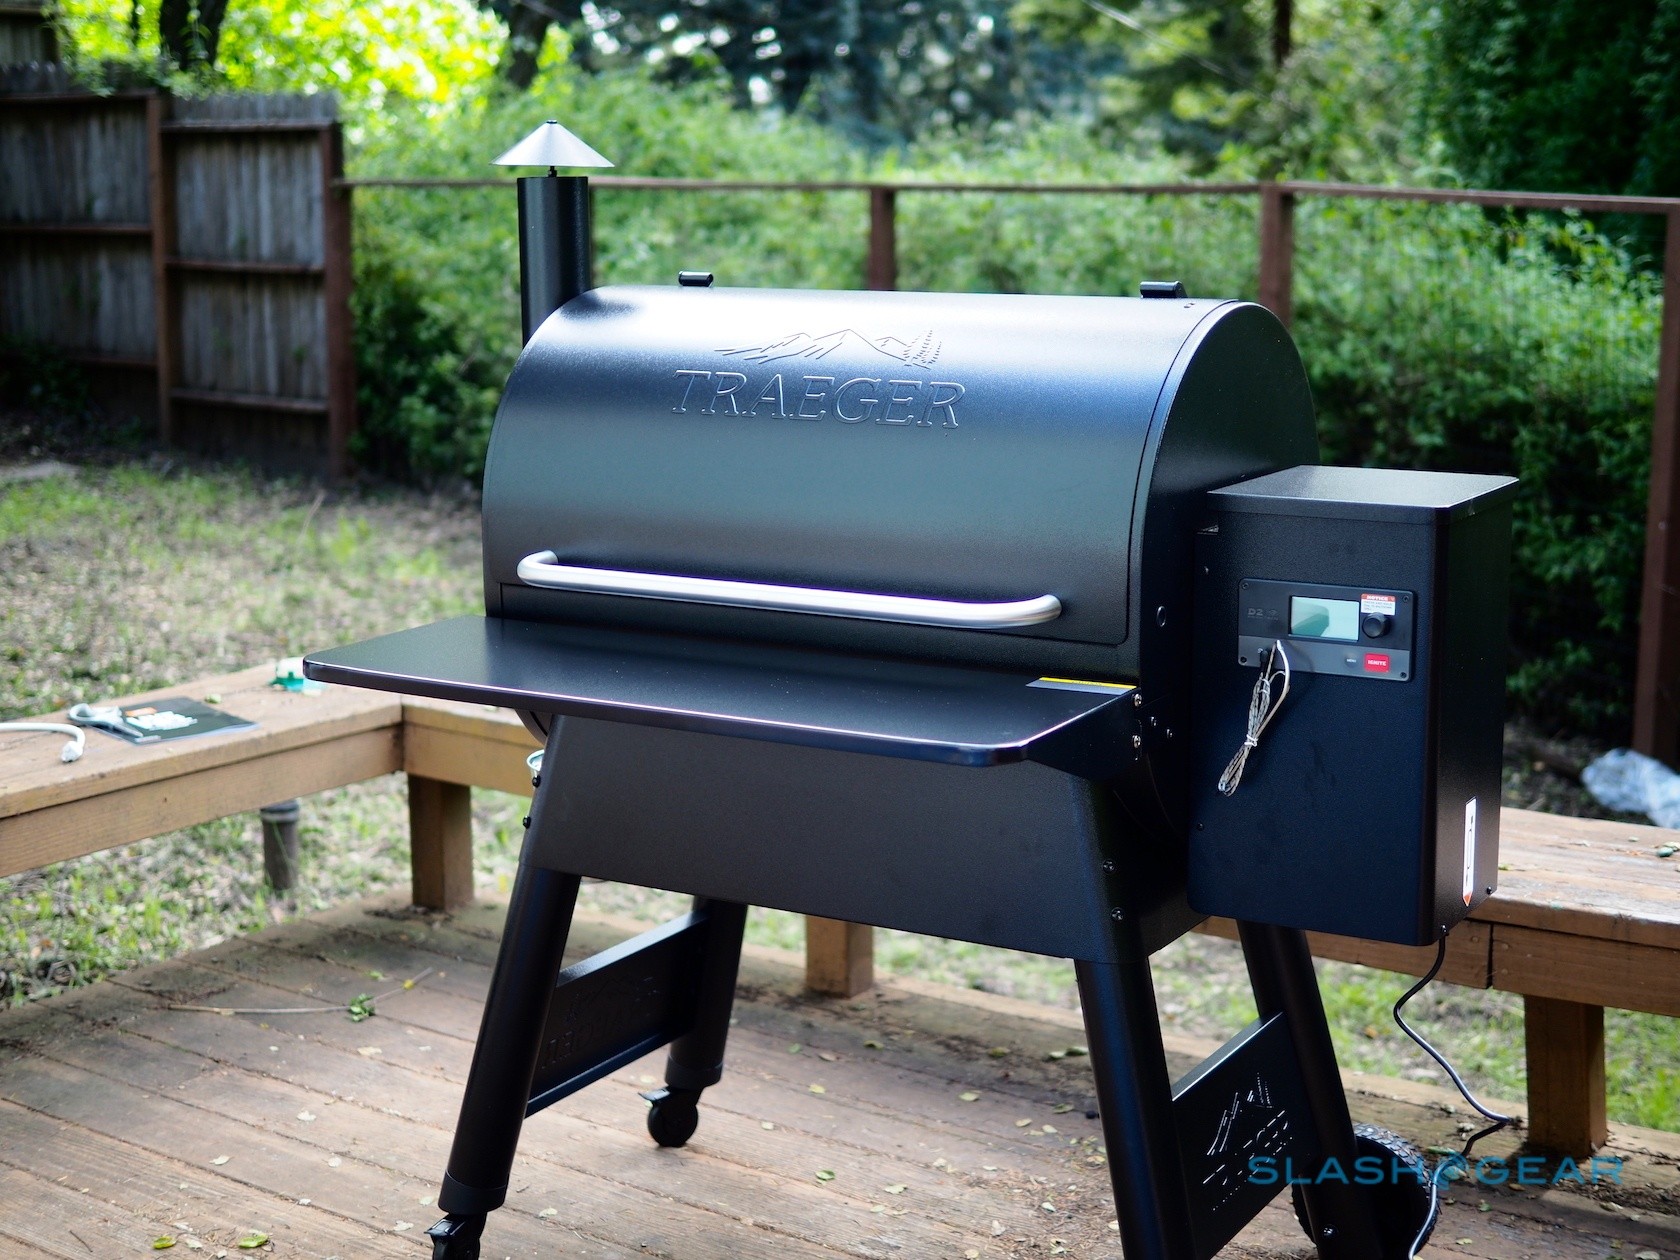 Trager Pro Controller Wiring Traeger Pro 780 Review why Your Next Pellet Grill Needs